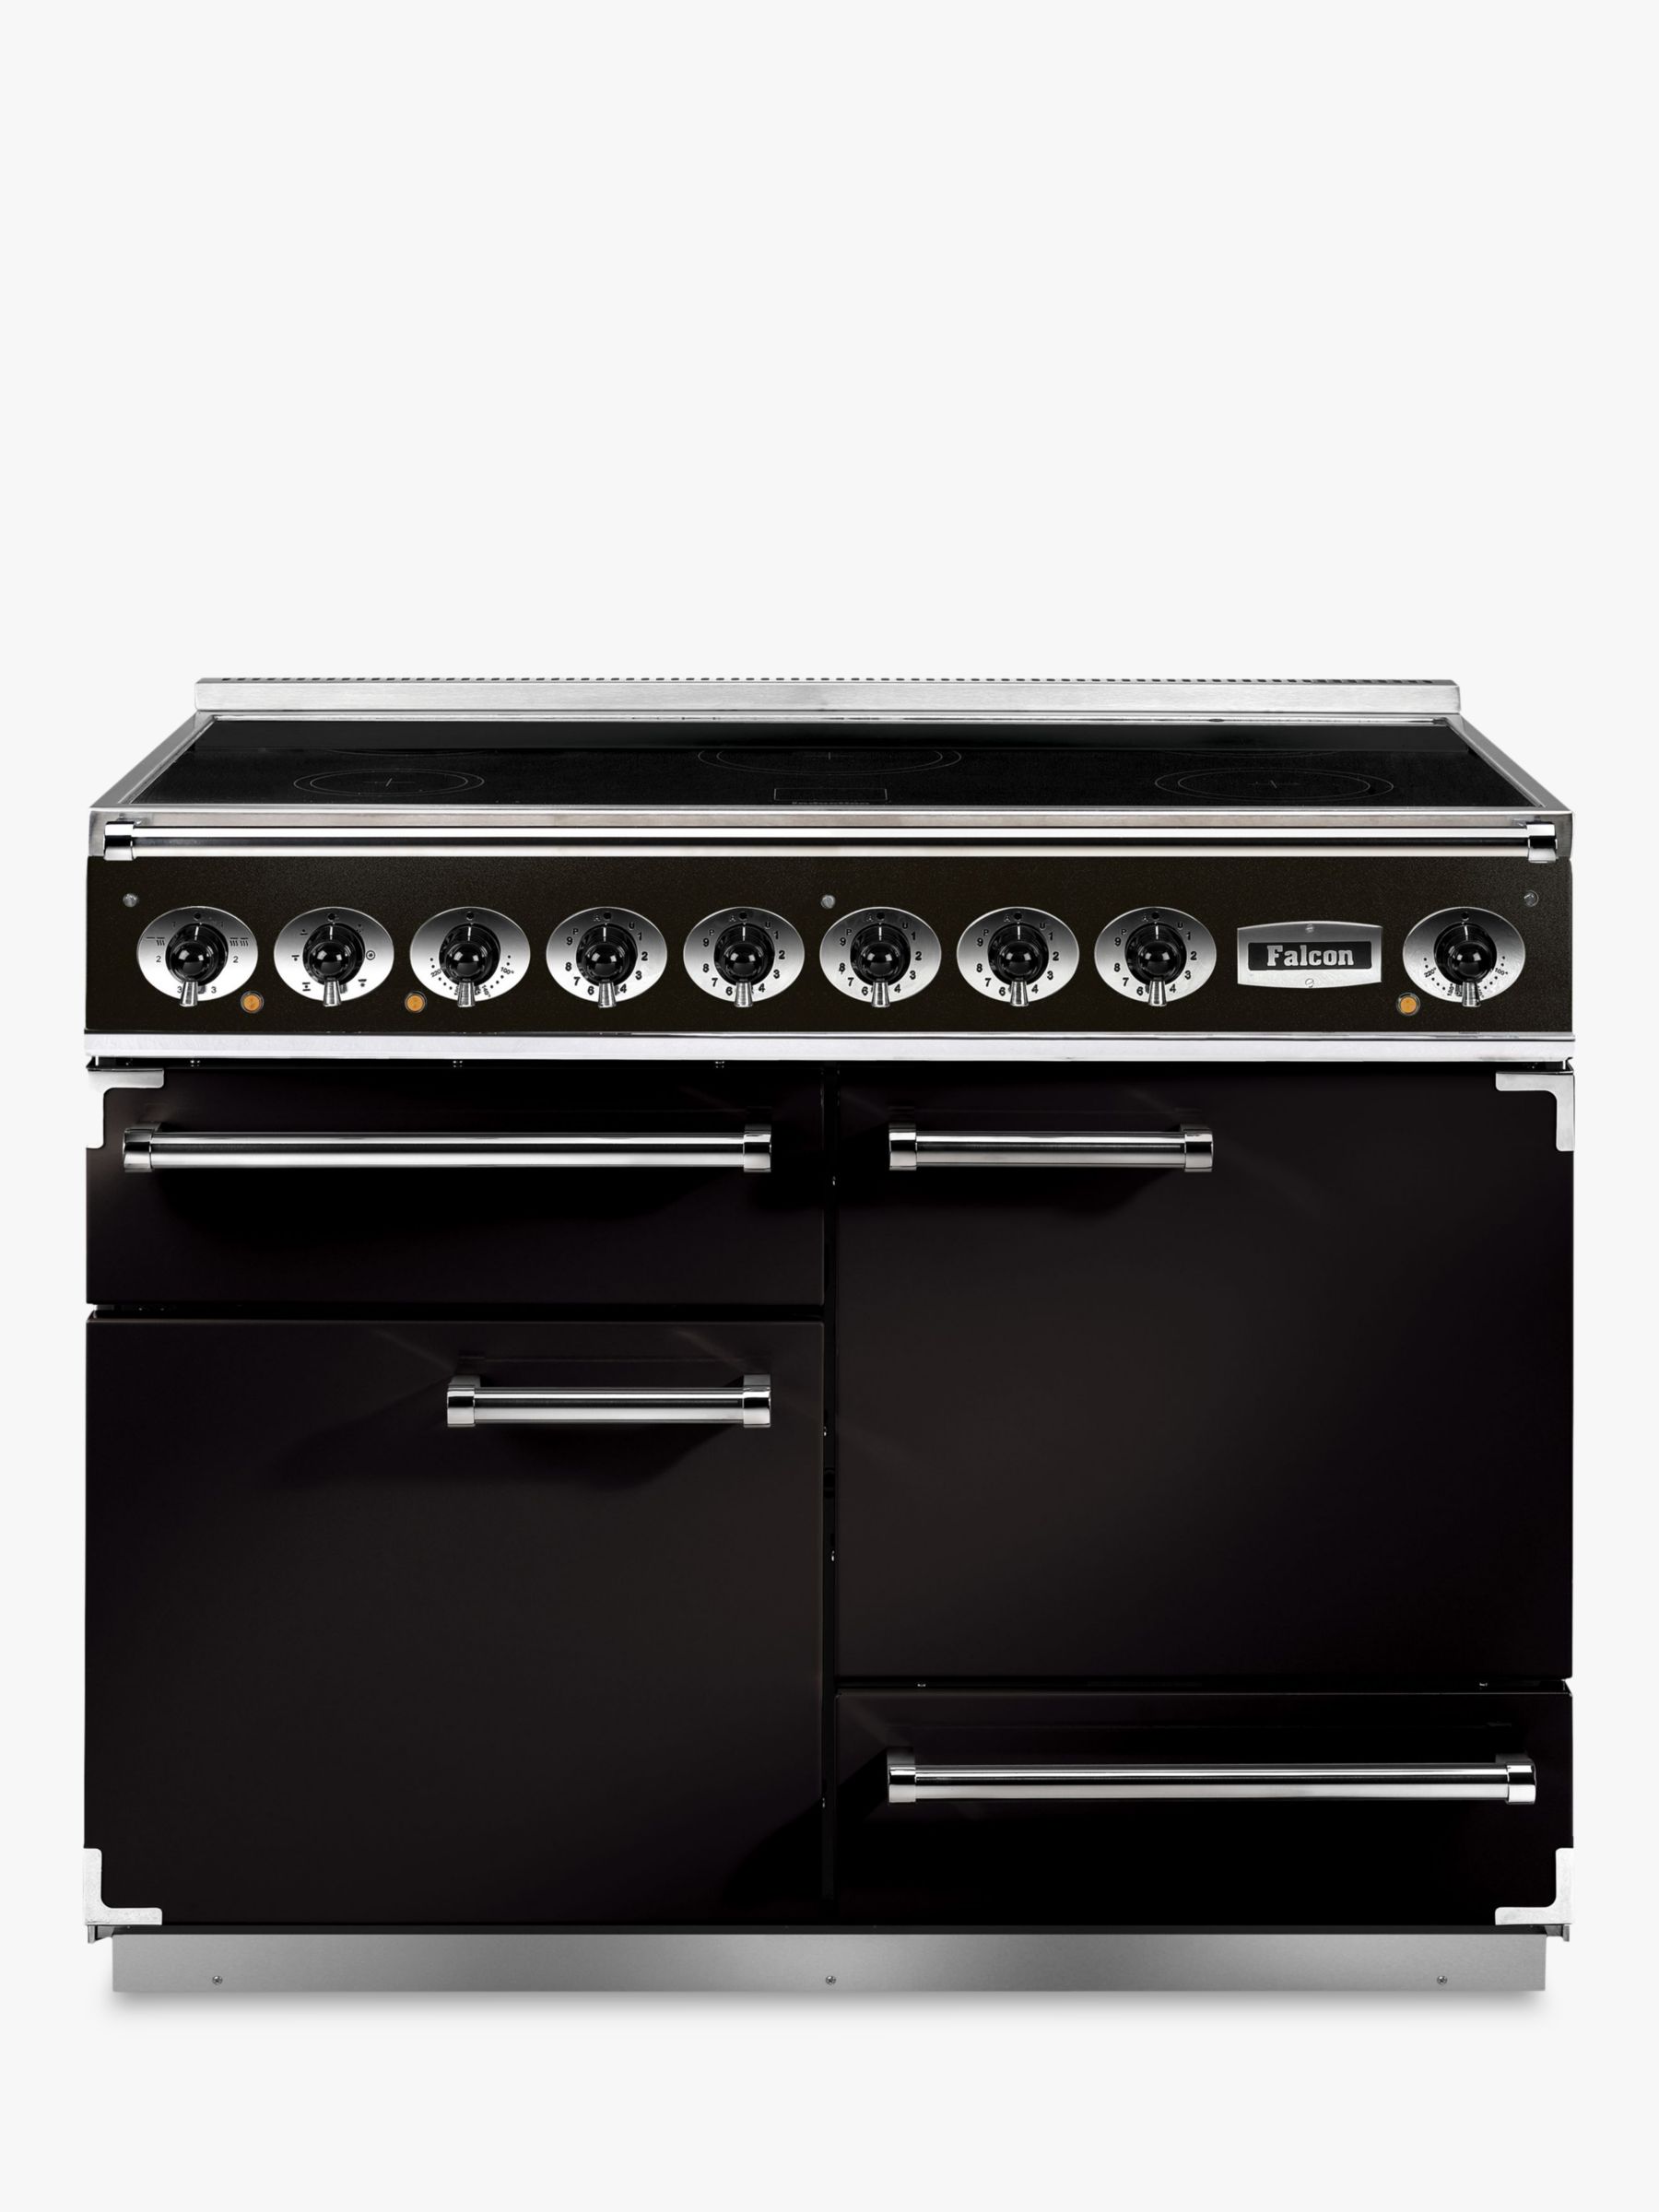 Falcon 1092 Deluxe Induction Hob Range Cooker, Black